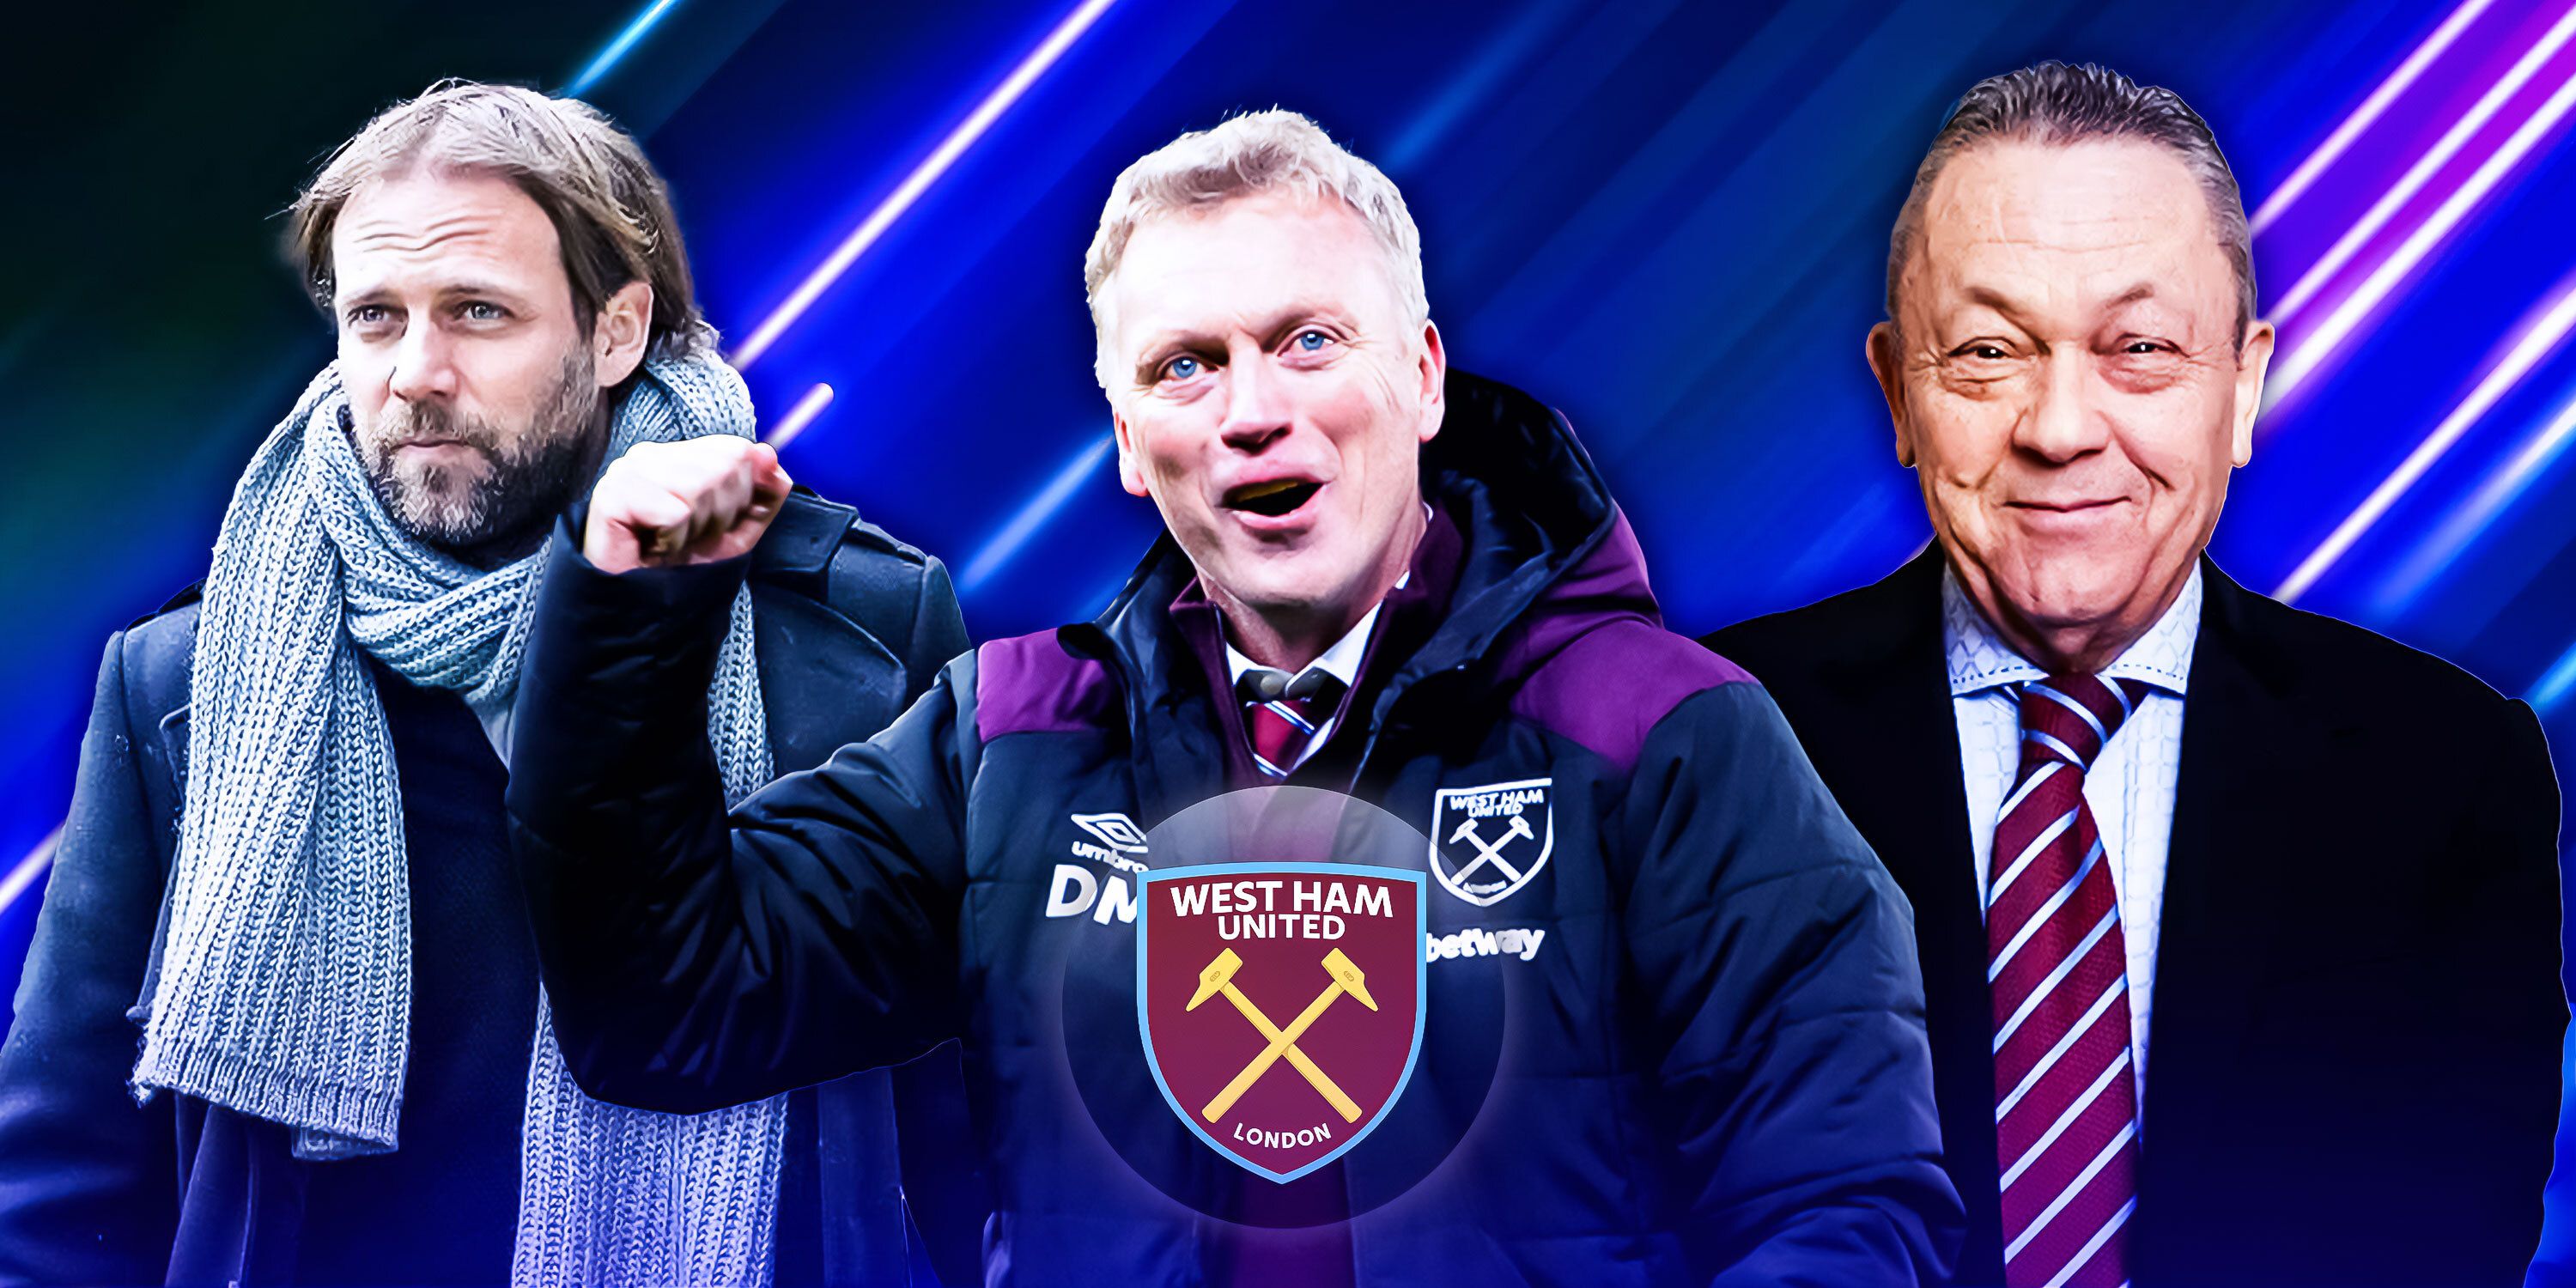 David Moyes Could Soon be in Strong Position at West Ham